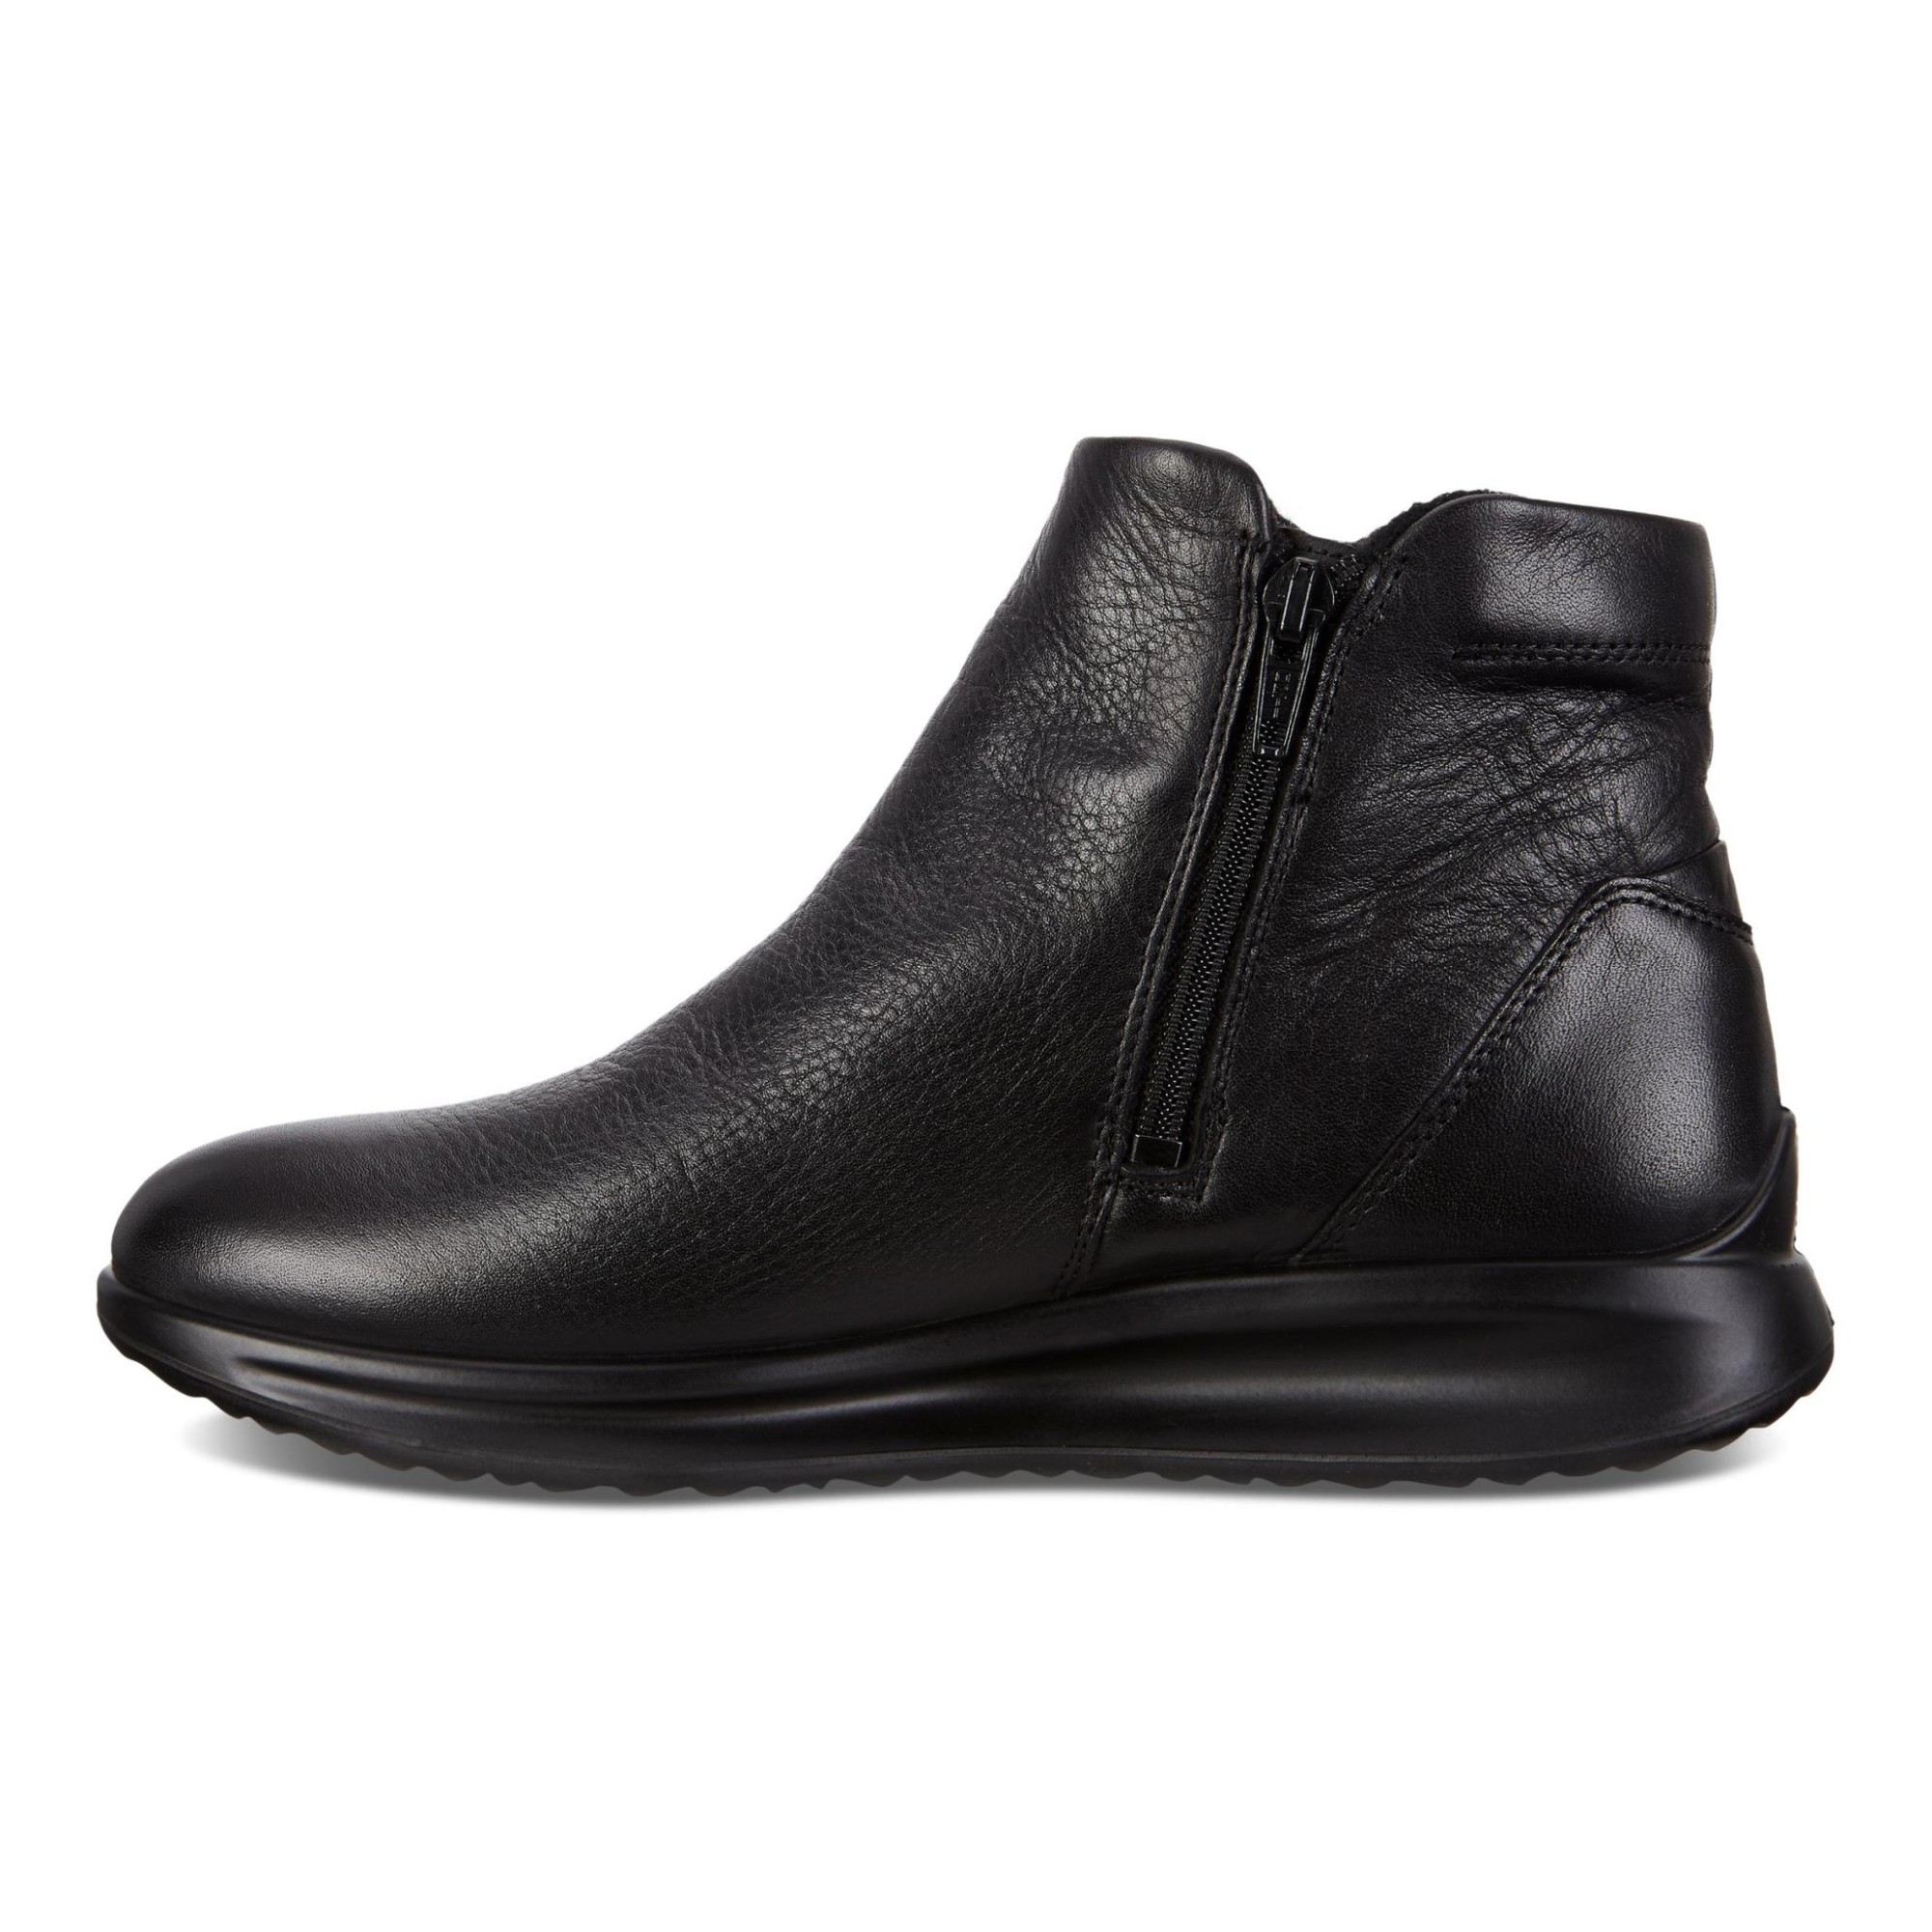 Ecco AQUET Ankle Boot 41 - - Veryk Mall - Veryk Mall, many product, quick response, safe your money!